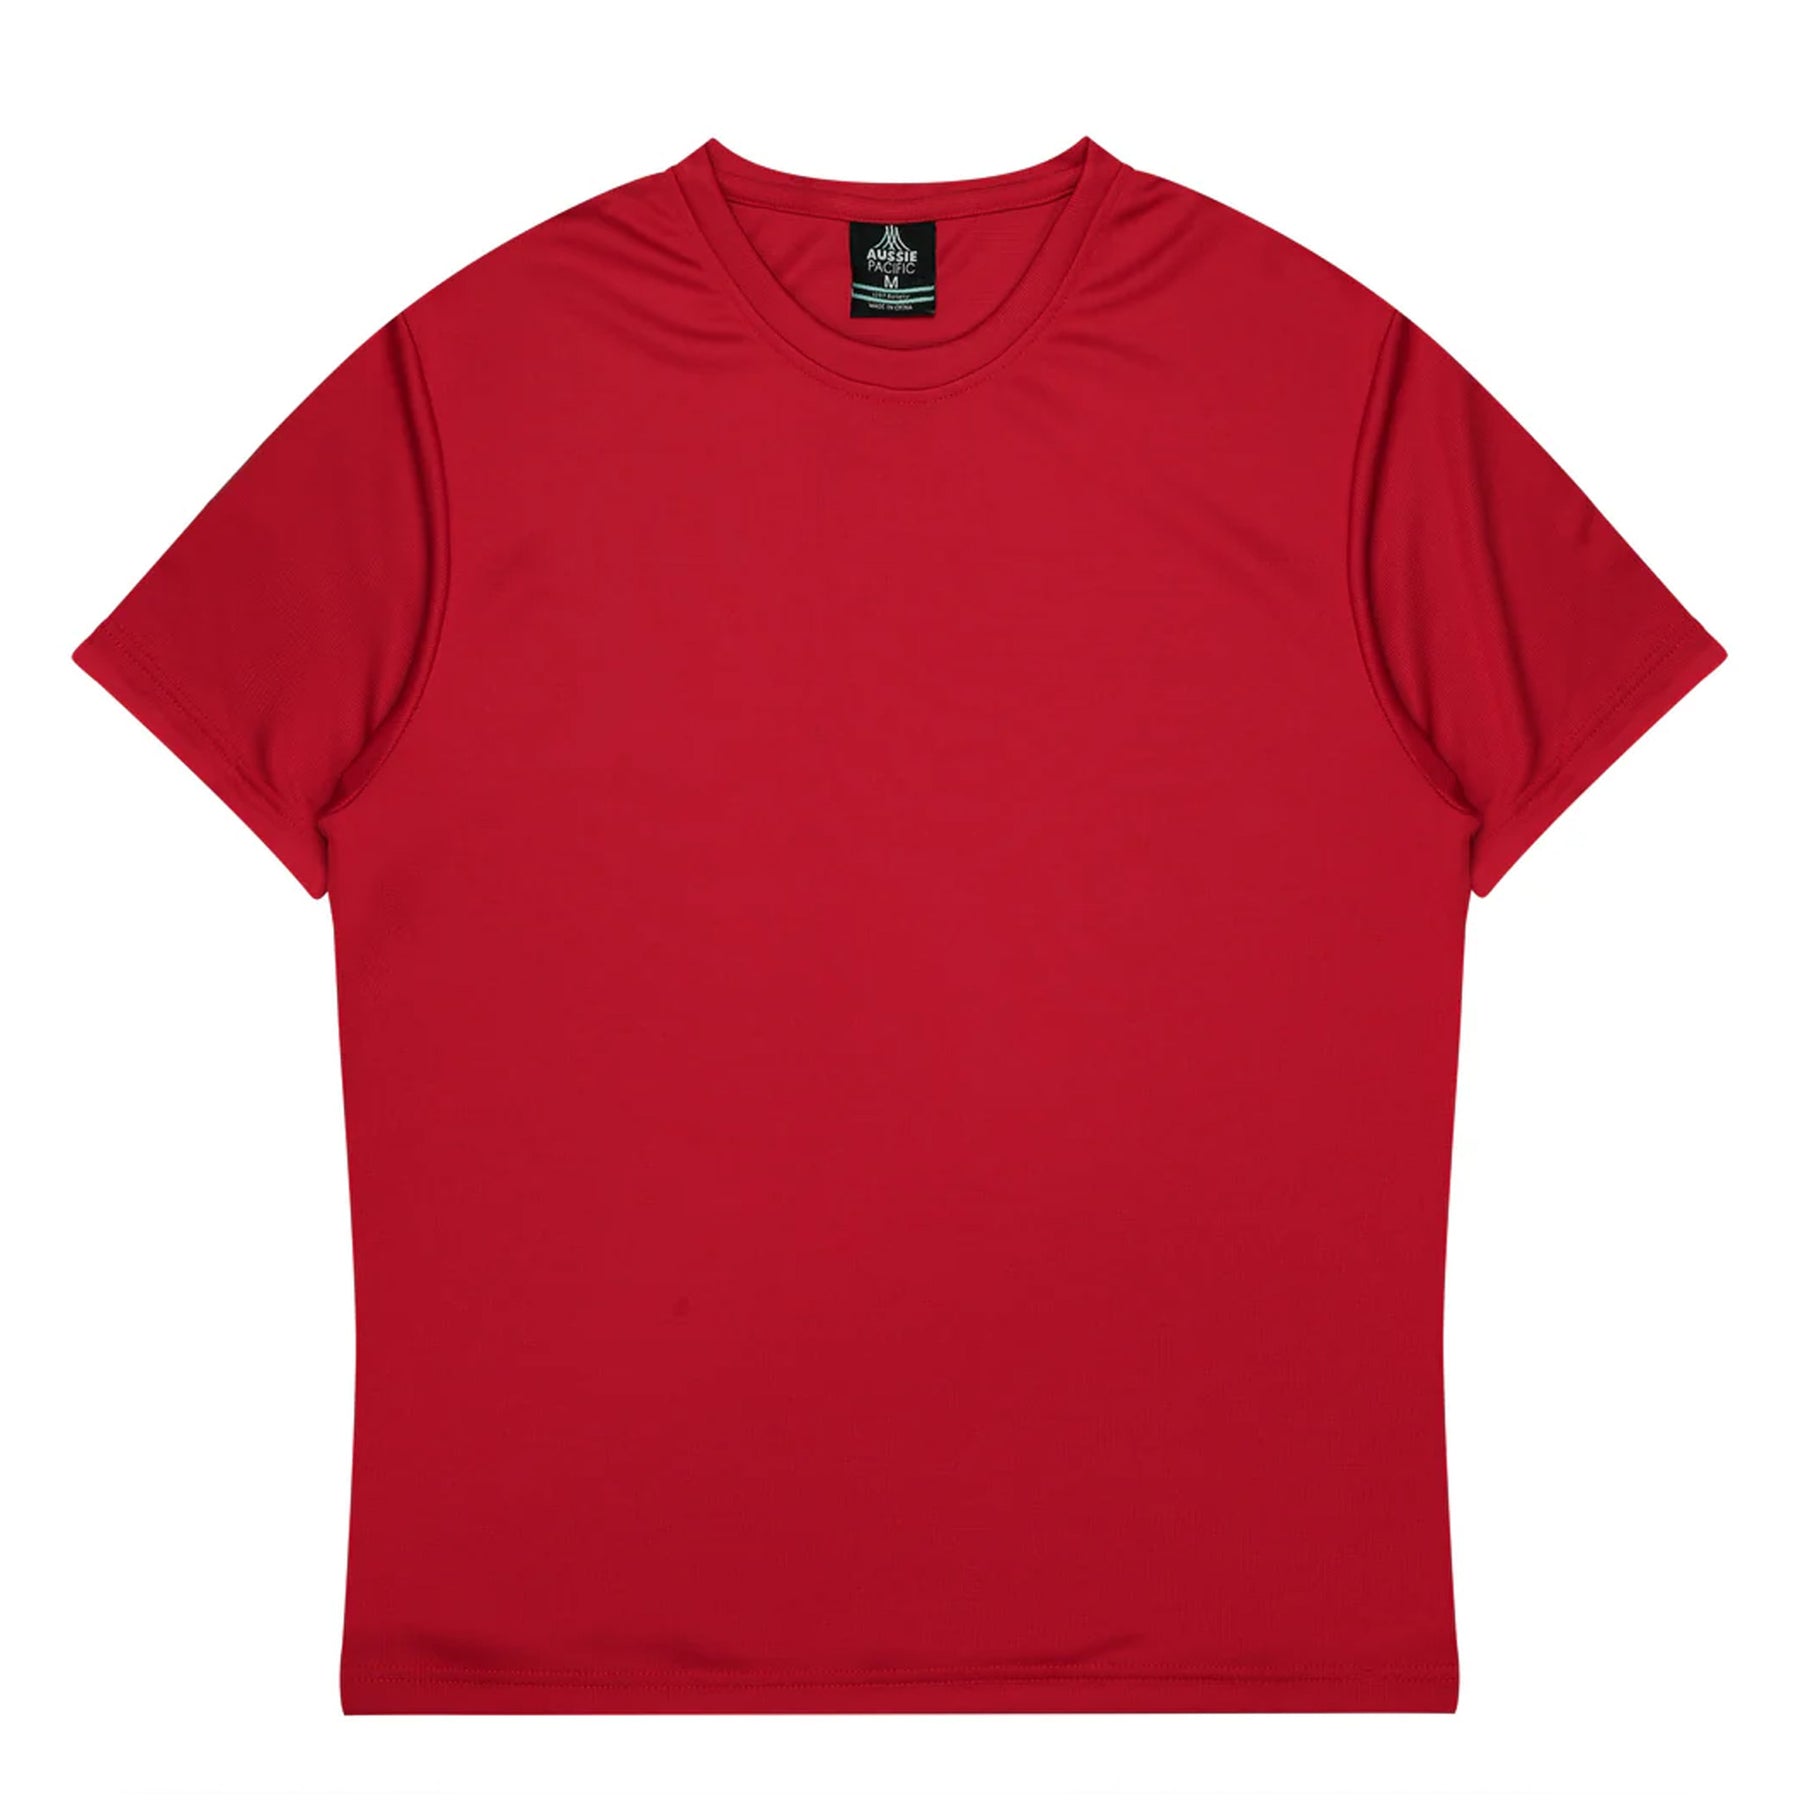 aussie pacific botany kids tee in red